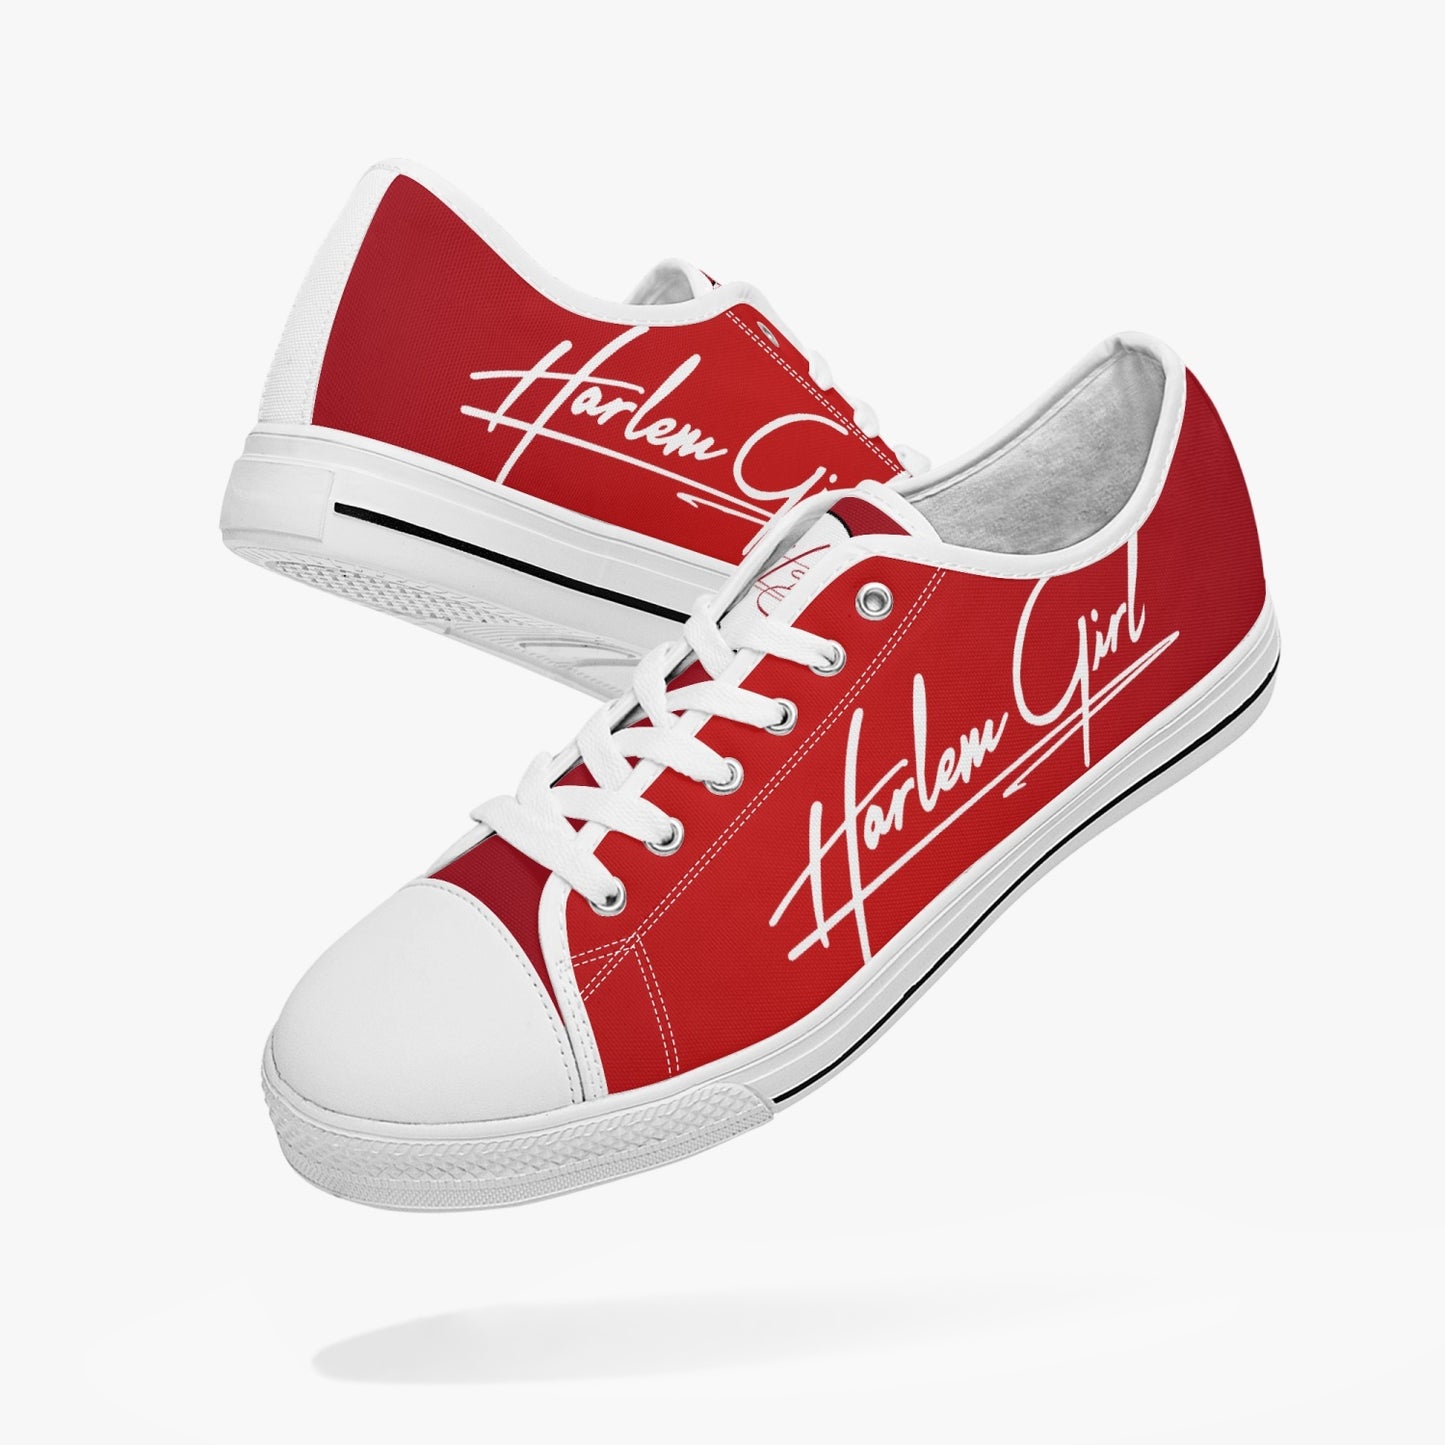 HB Harlem Girl "Lenox Ave" Classic Low Tops - Ruby - Women (Black or White Sole)